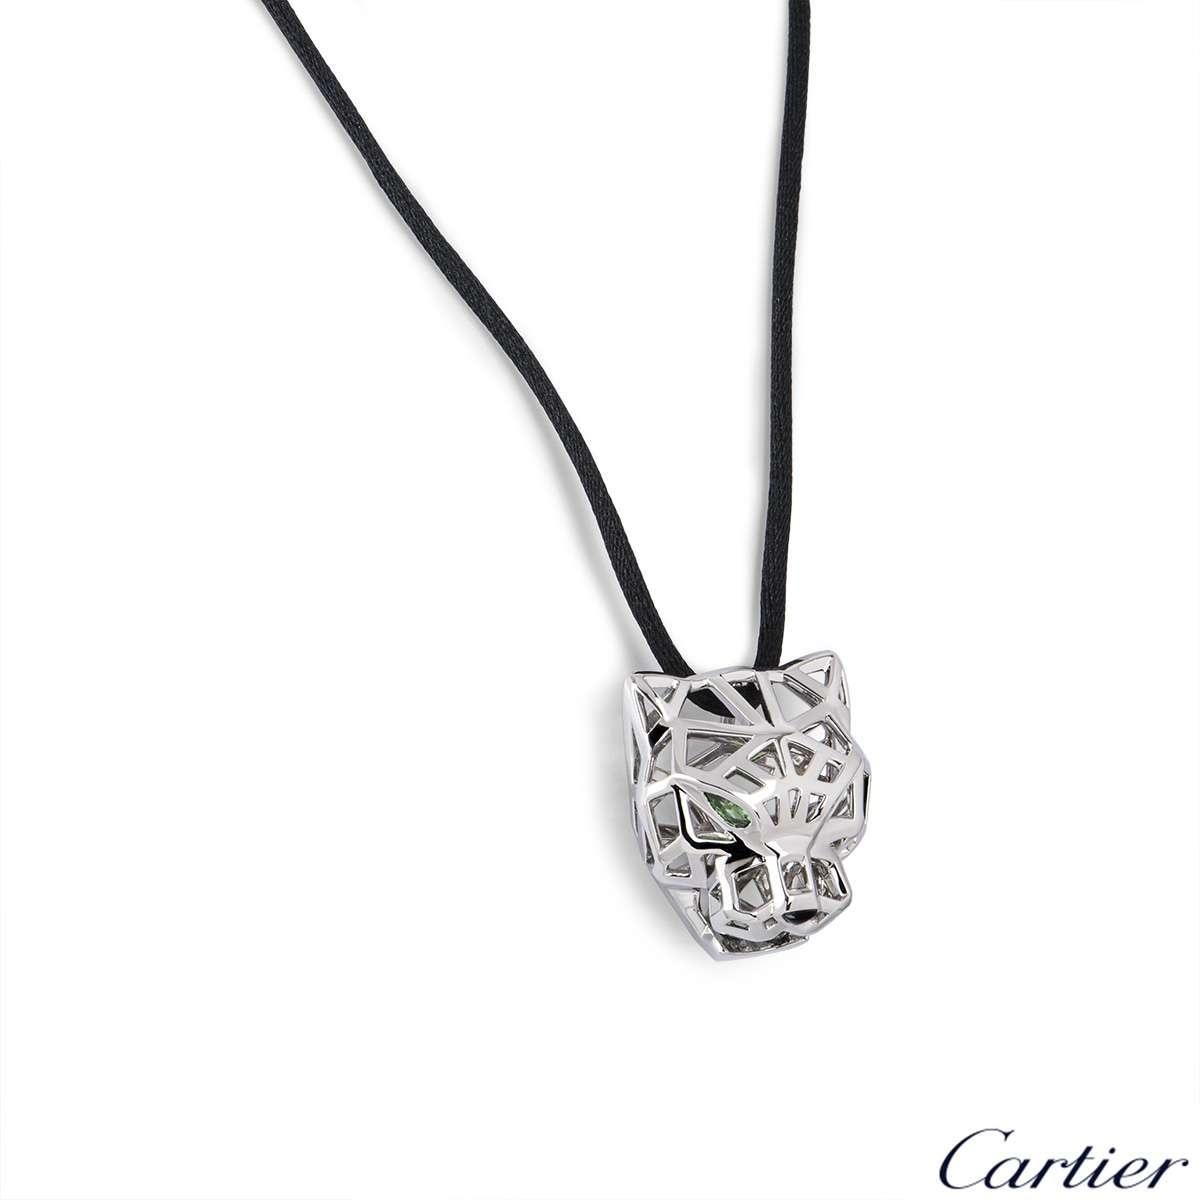 An 18k white gold Panthere de Cartier necklace. The motif is designed as an openwork Panthere head, with tsavorite garnets for the eyes and onyx for the nose. The motif measures 2.7cm in width and 3cm in length. The motif comes on an adjustable 25